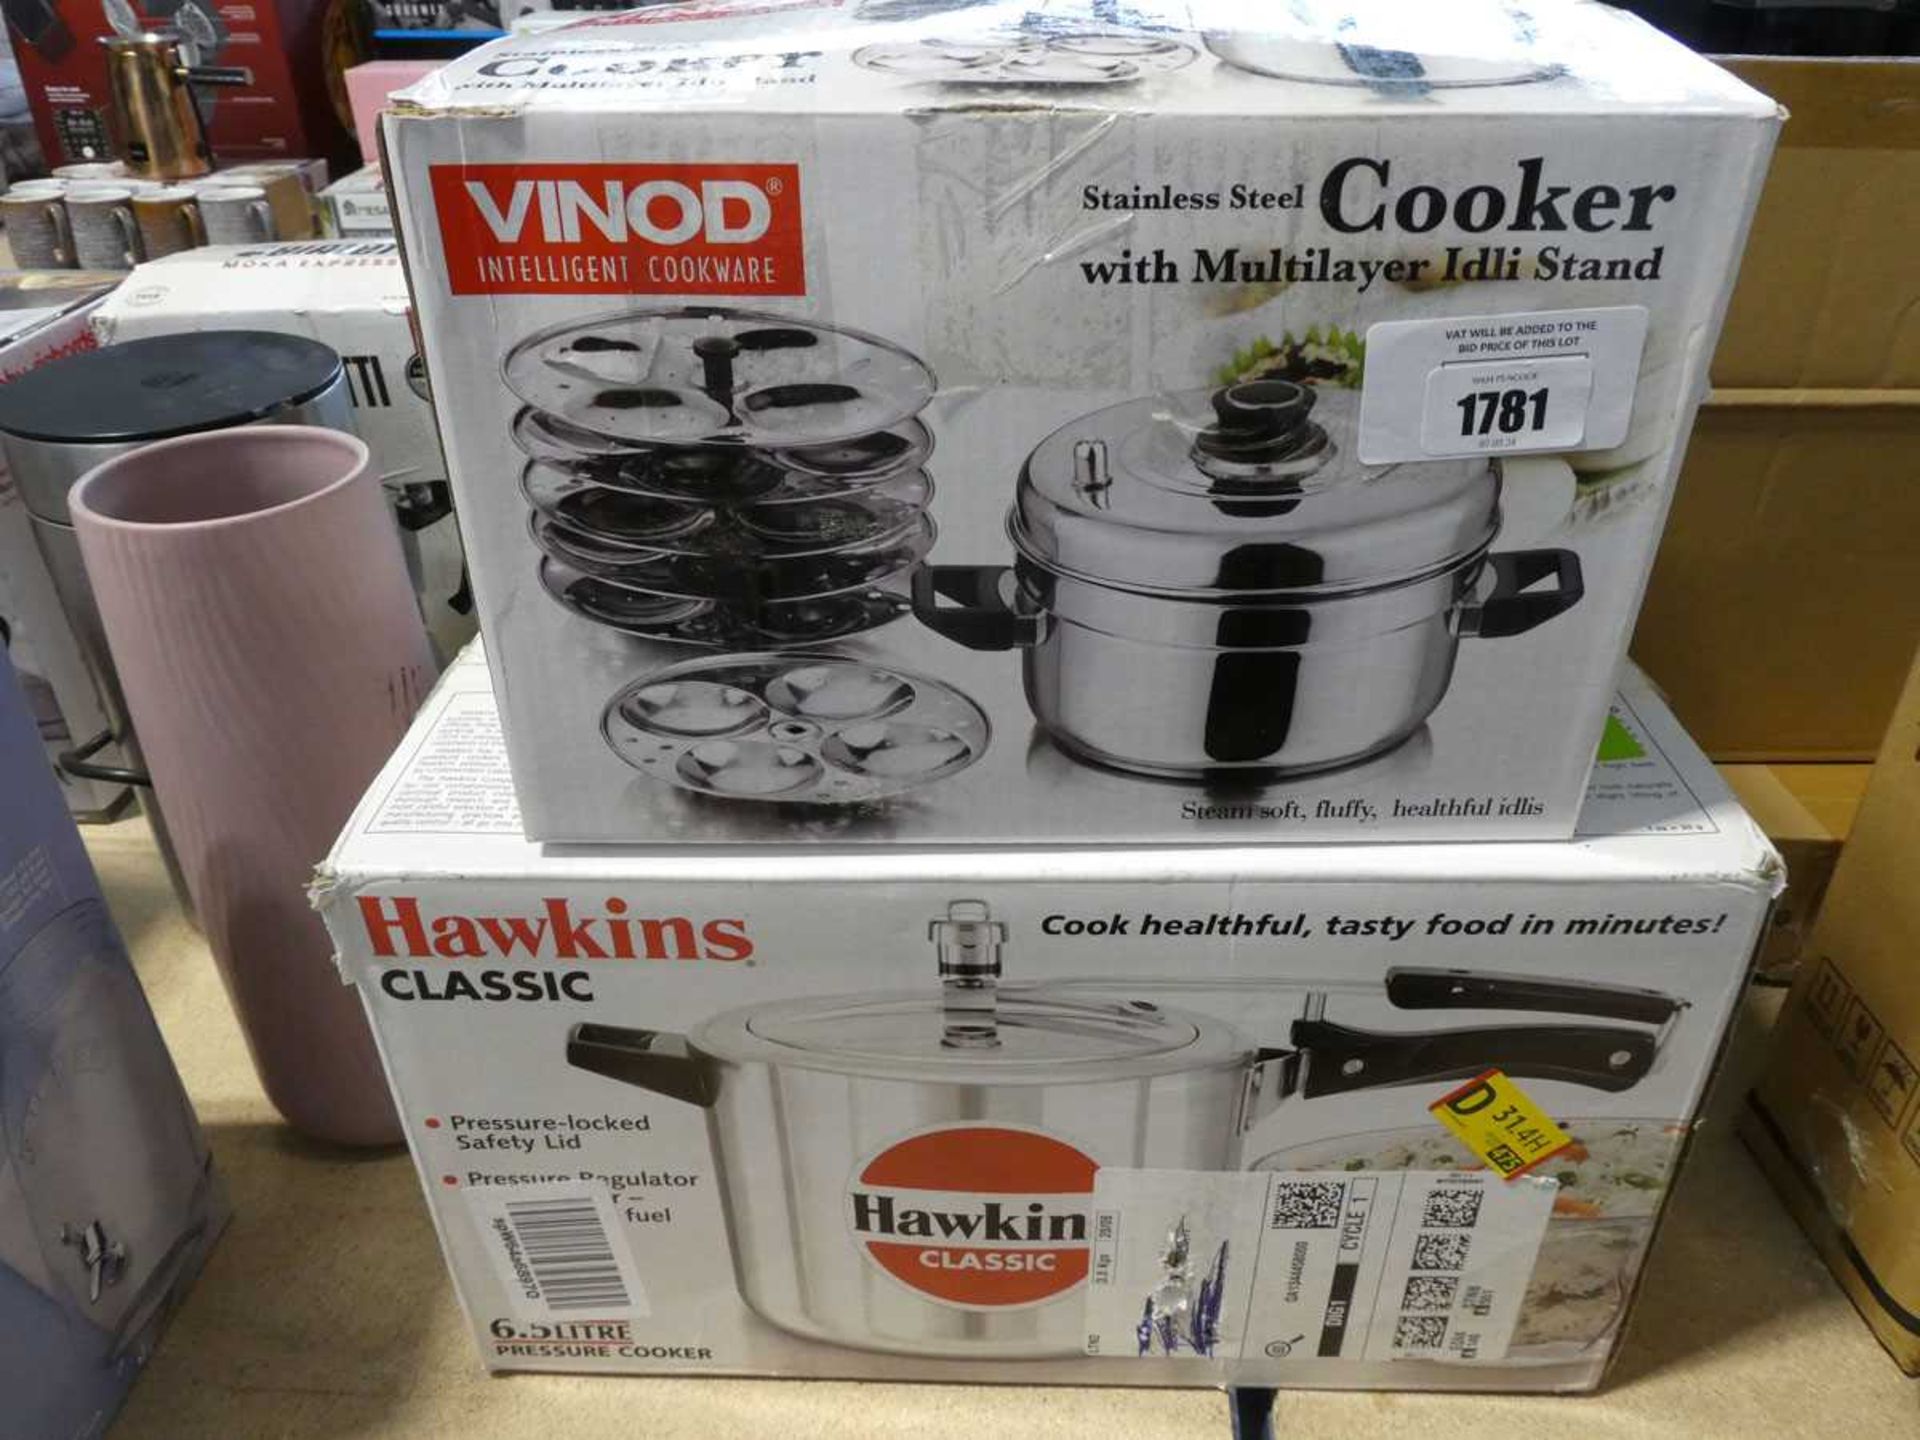 +VAT Vinod stainless steel cooker with multilayer stand, together with a Hawkins Classic pressure